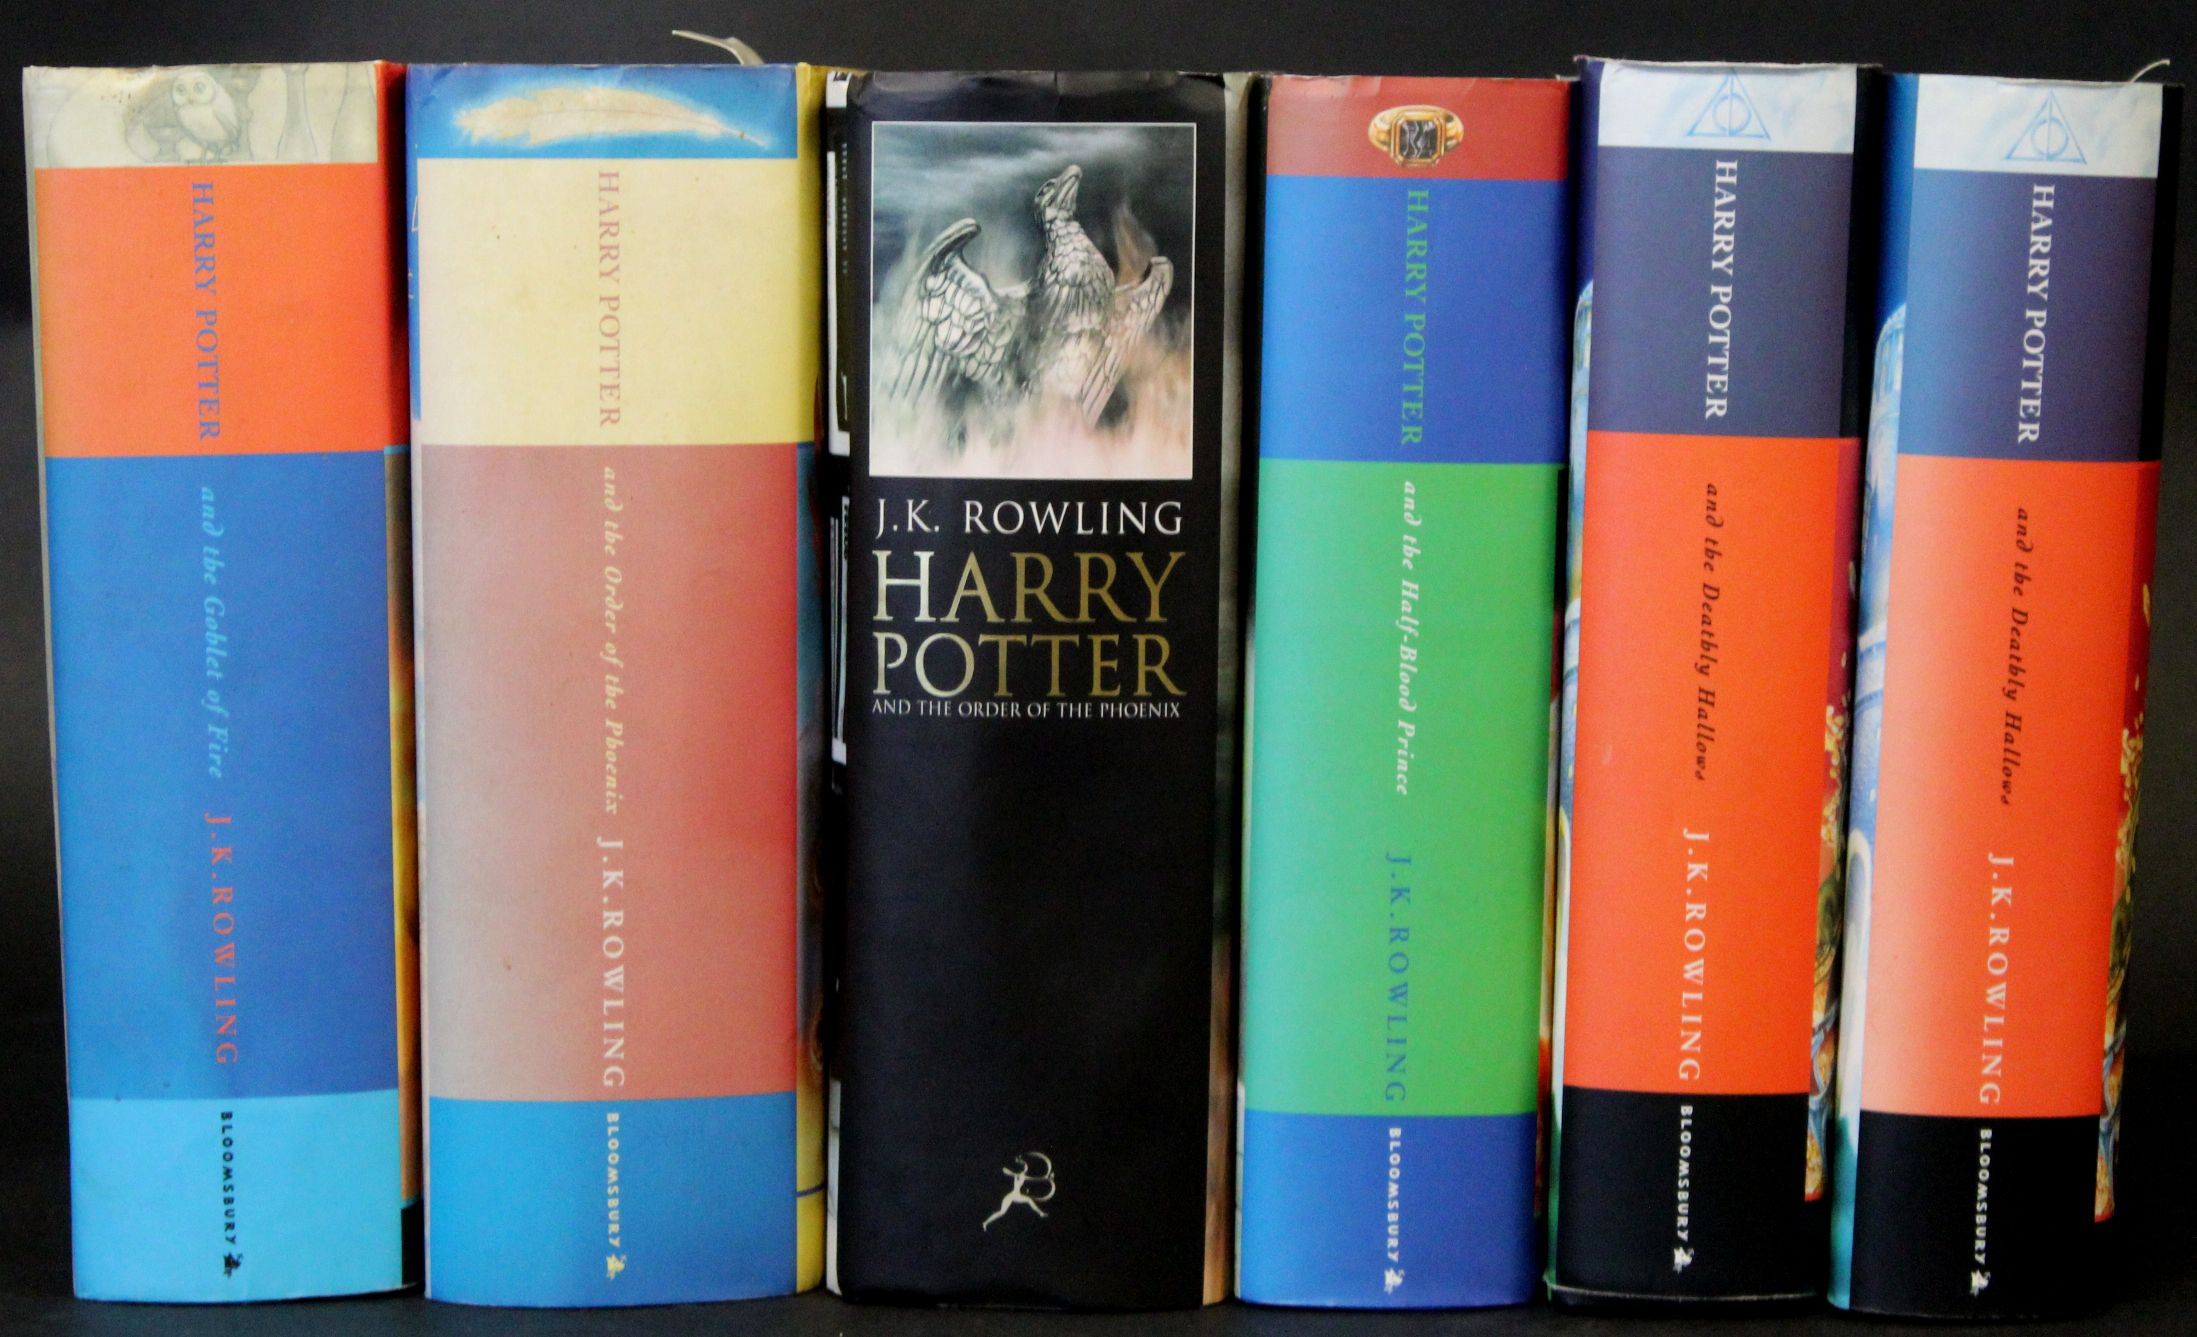 J K ROWLING: 5 titles: HARRY POTTER AND THE GOBLET OF FIRE, Bloomsbury, 2000, 1st edition, - Image 2 of 2